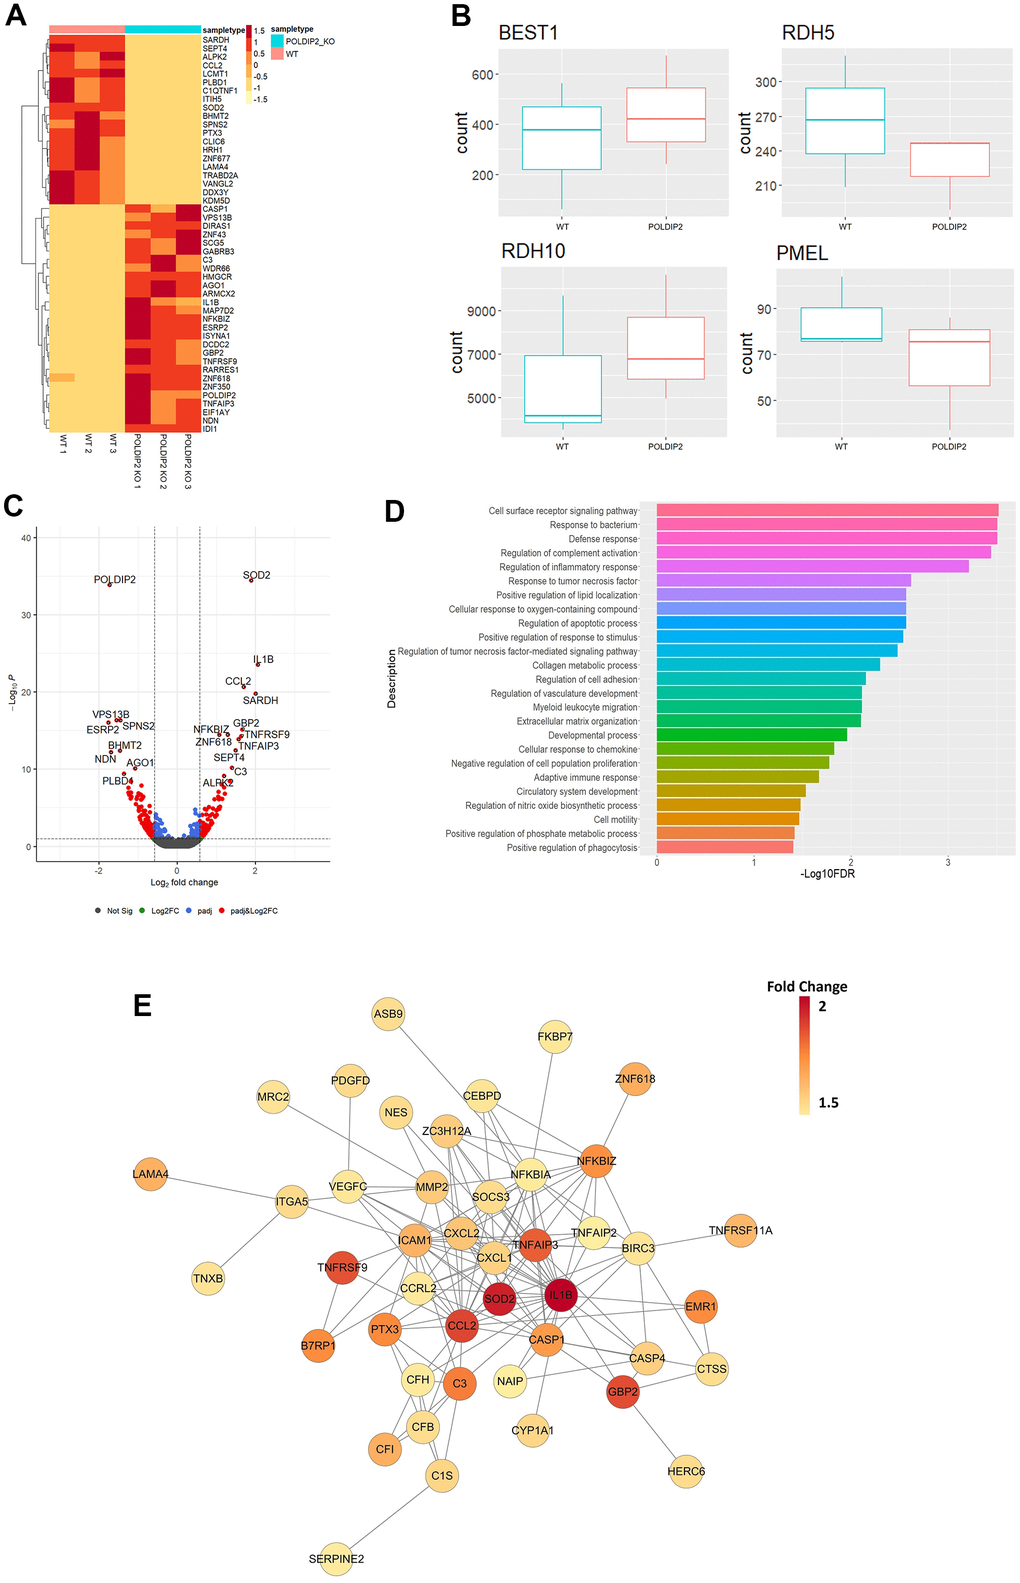 Transcriptome profiling of POLDIP2 knockout in ARPE-19. (A) Heatmap of top 50 DE genes detected in WT (n=3) and POLDIP2 KO (n=3) cell lines. (B) Boxplot of the expression levels of RPE markers BEST1, RDH5, RDH10, and PMEL in different samples. (C) Volcano plot of the top 20 DE genes labelled in POLDIP2 KO cell lines (n=3). (D) GO annotation of the top 50 up-regulated DE genes in POLDIP2 KO samples (n=3). (E) Network topology of the top up-regulated DE genes in POLDIP2 KO samples (n=3).